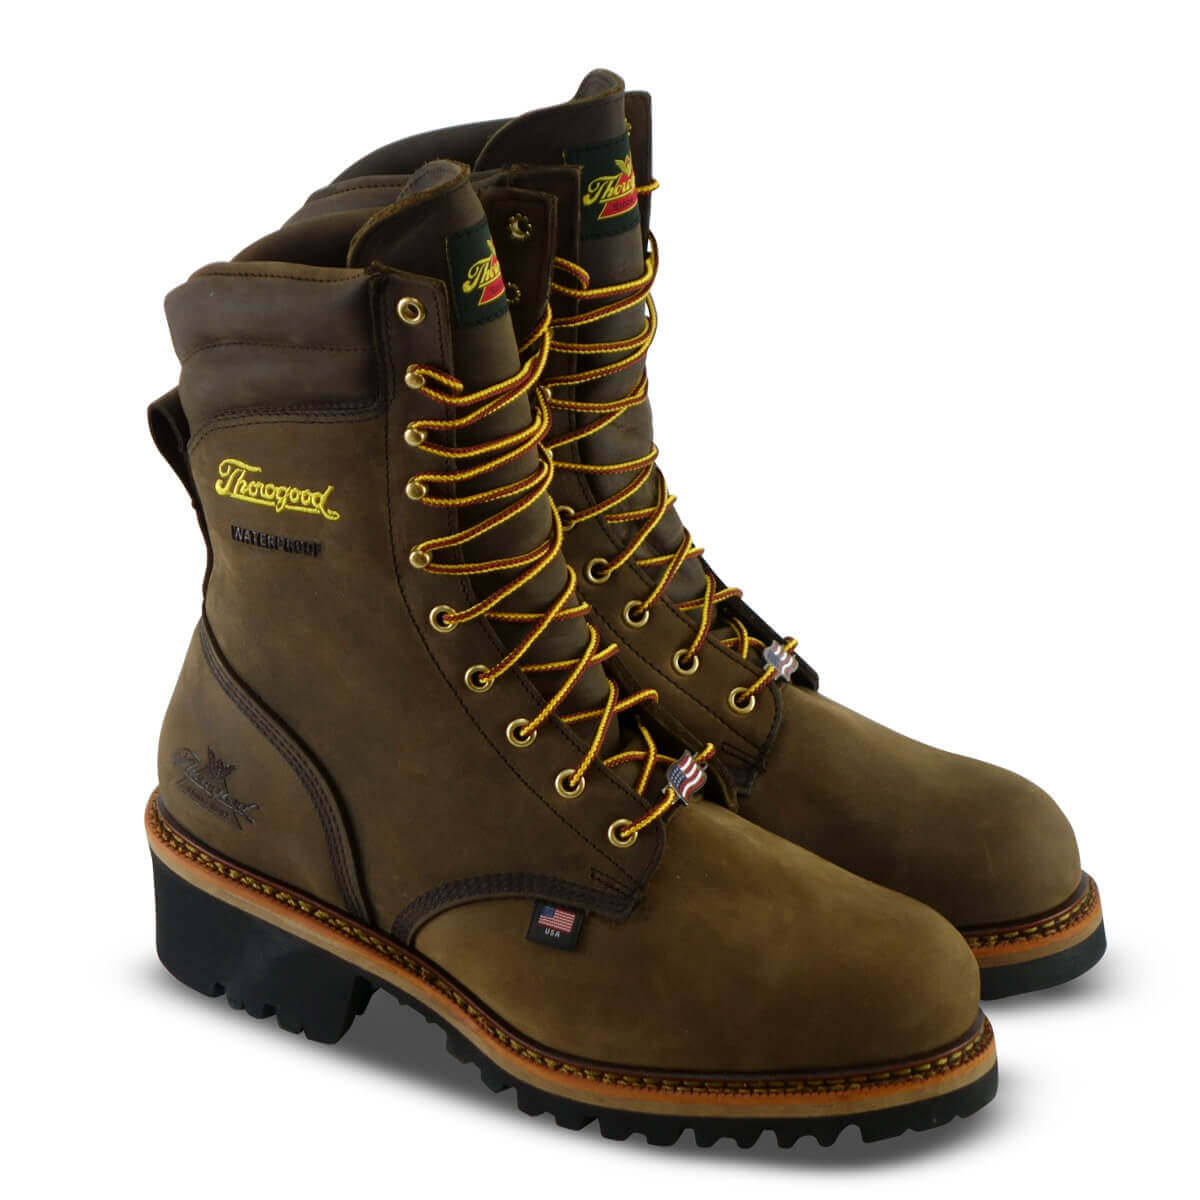 12 inch logger boots